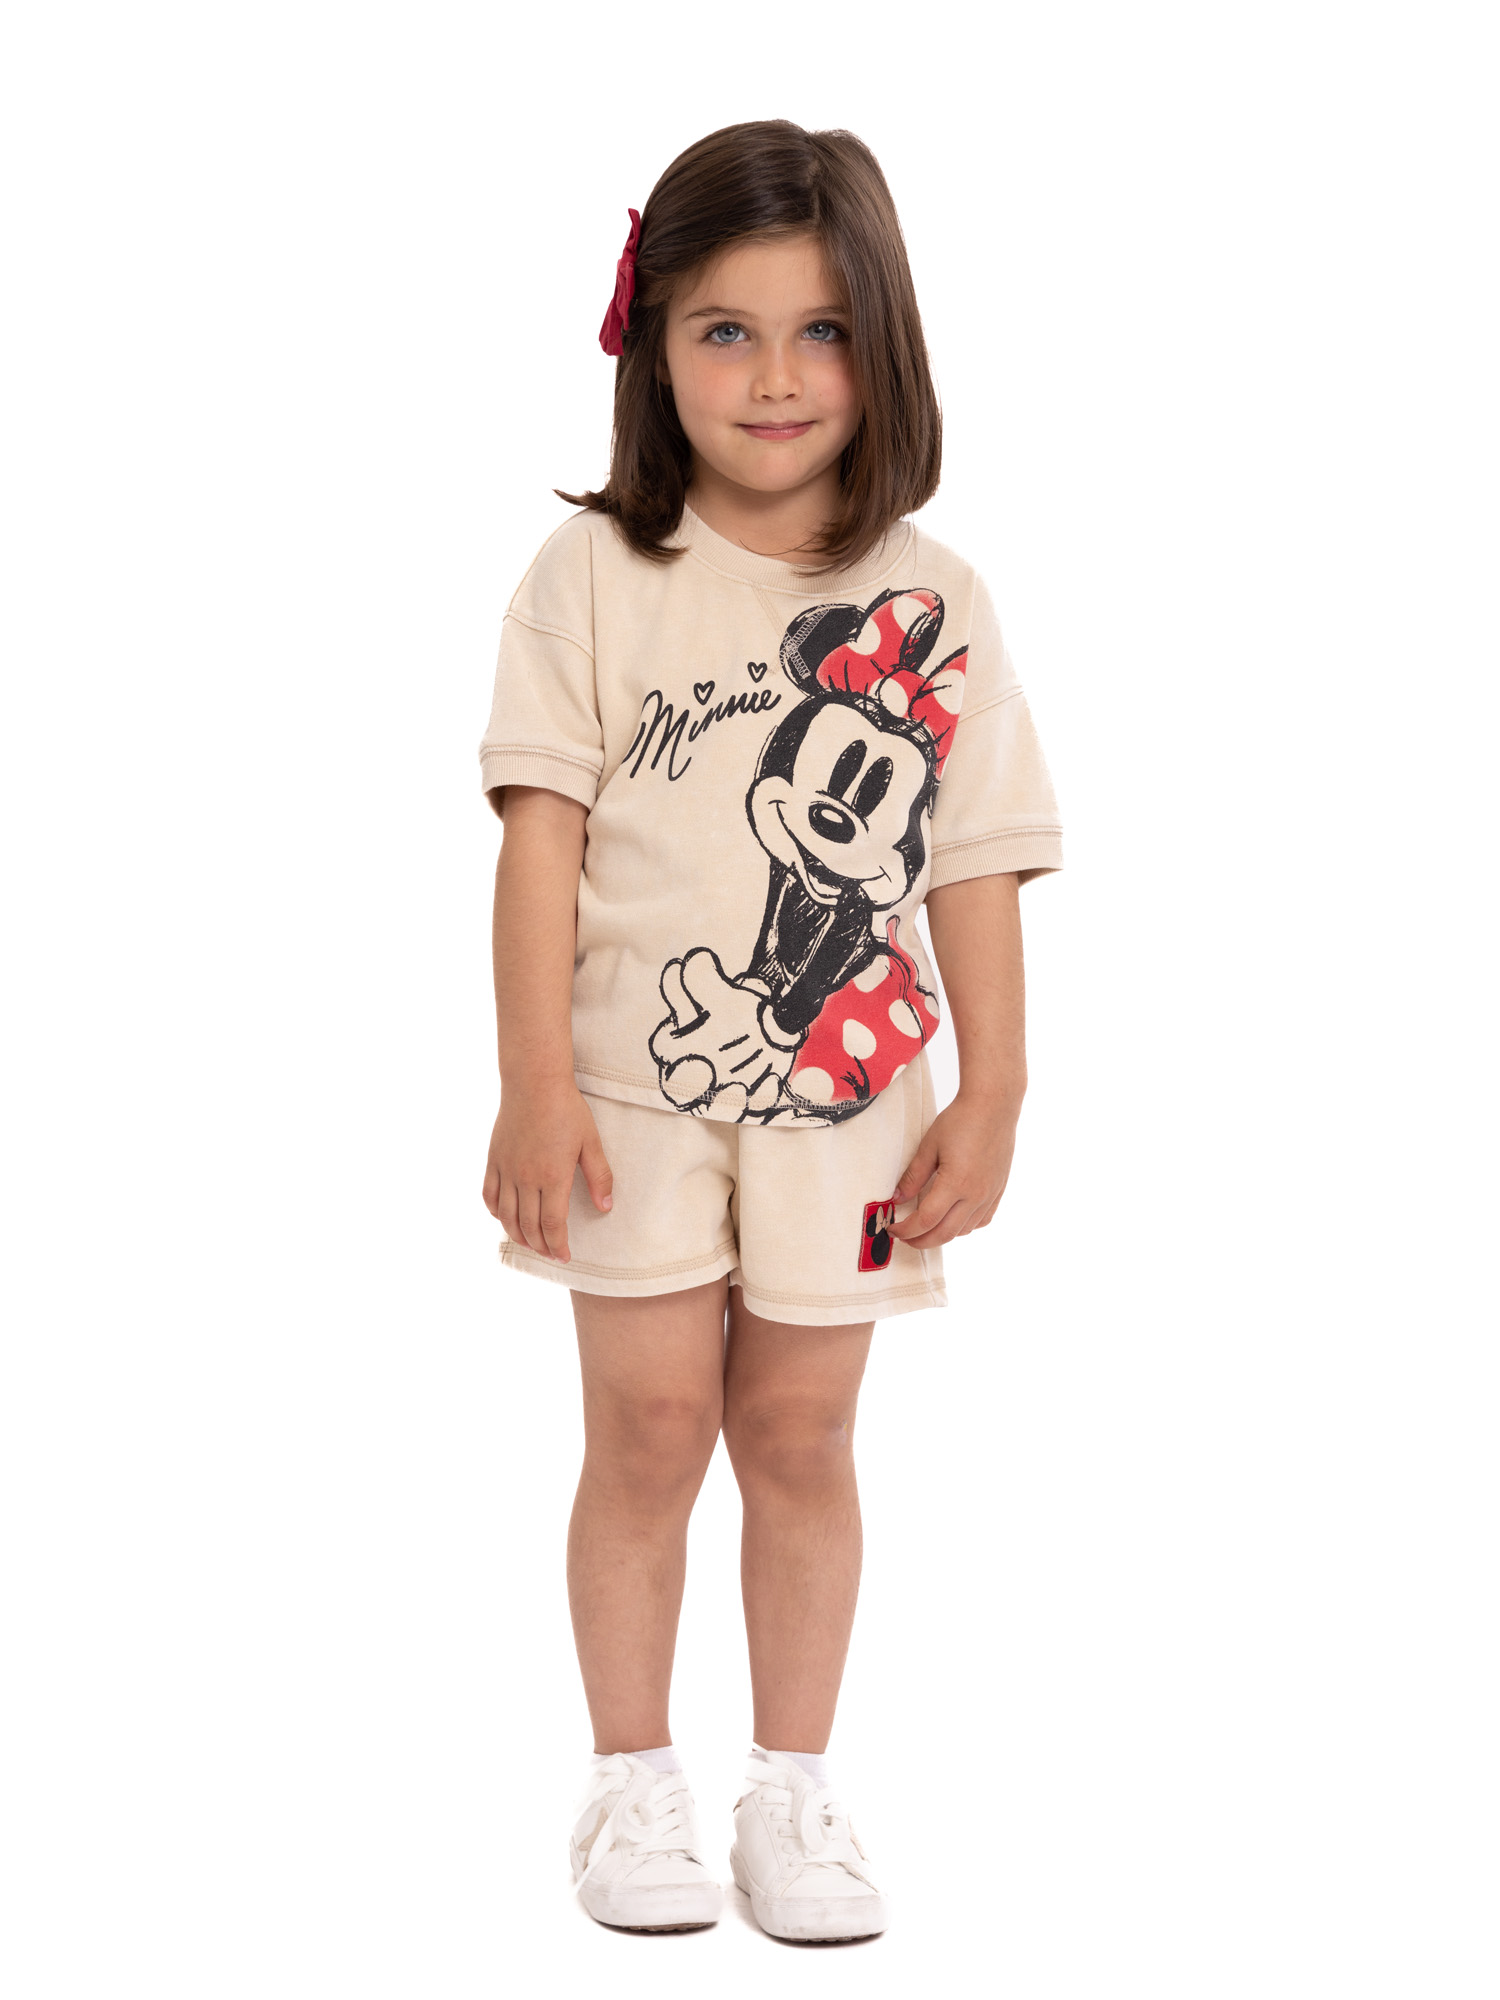 Minnie Mouse Toddler Girls Tee and Shorts Set, 2-Piece, Sizes 12M-5T - image 3 of 11